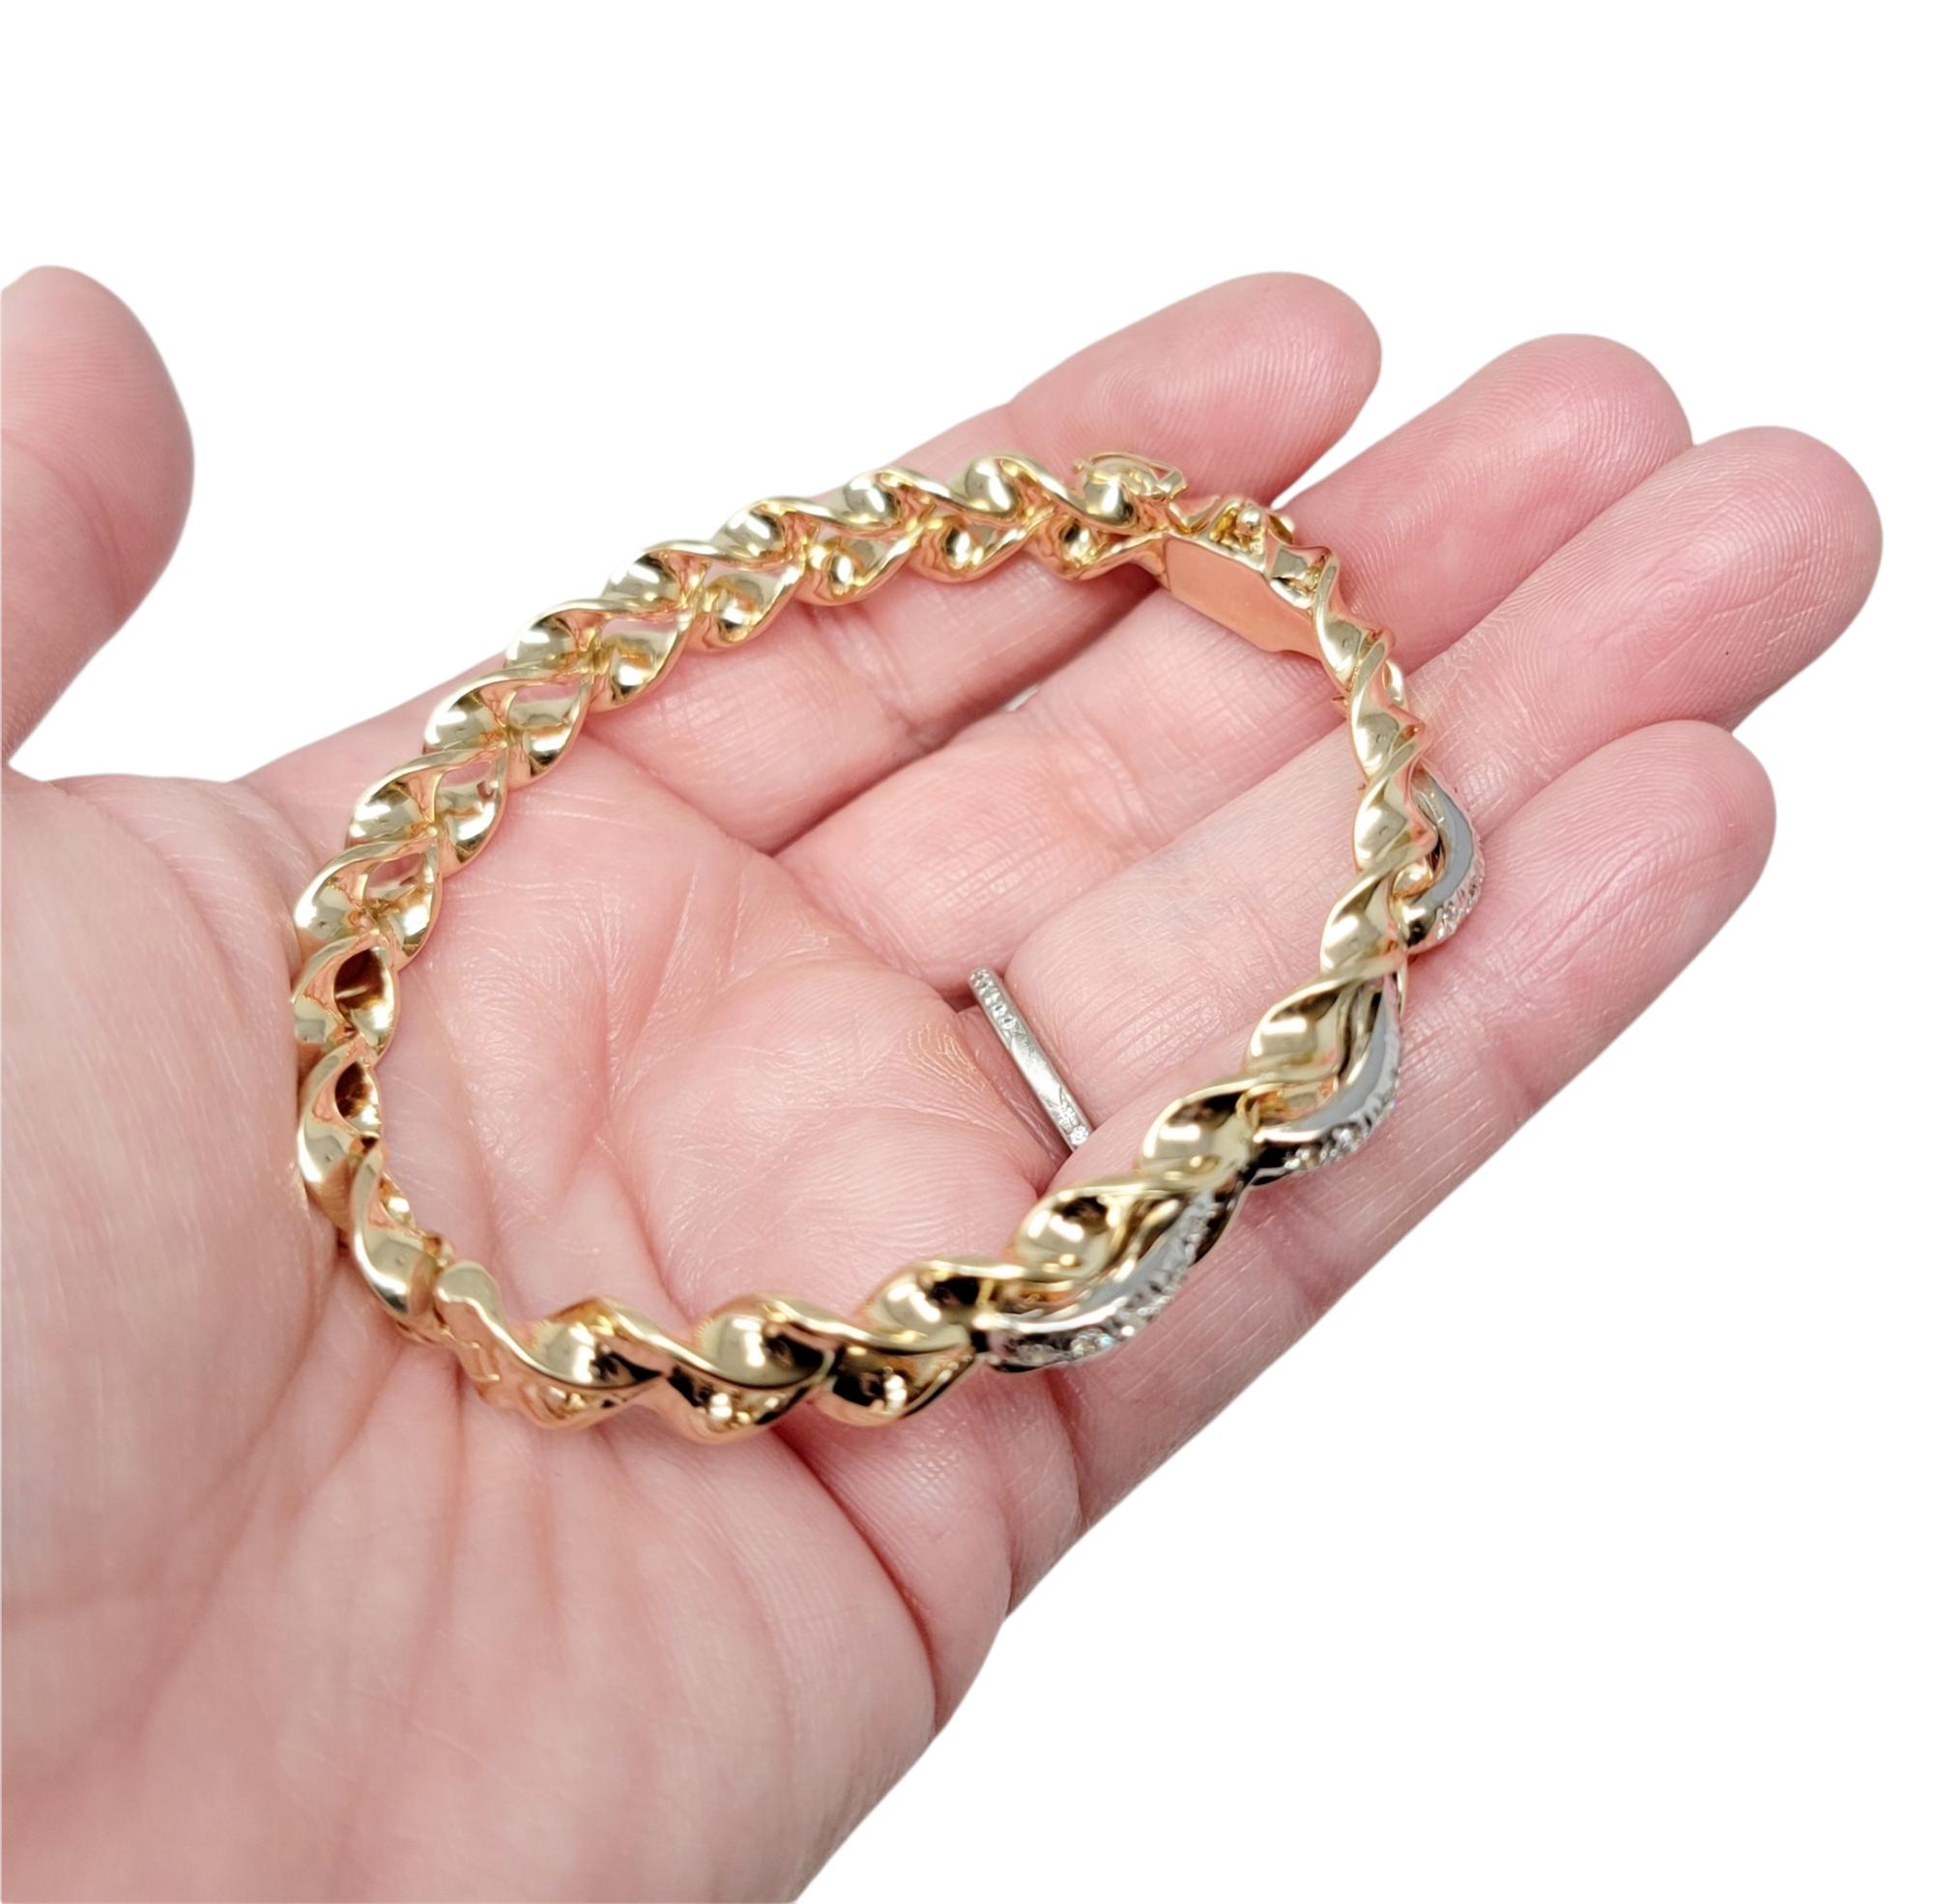 .50 Carat Total Round Diamond Twisted Hinged Bangle Bracelet in Yellow Gold In Good Condition For Sale In Scottsdale, AZ